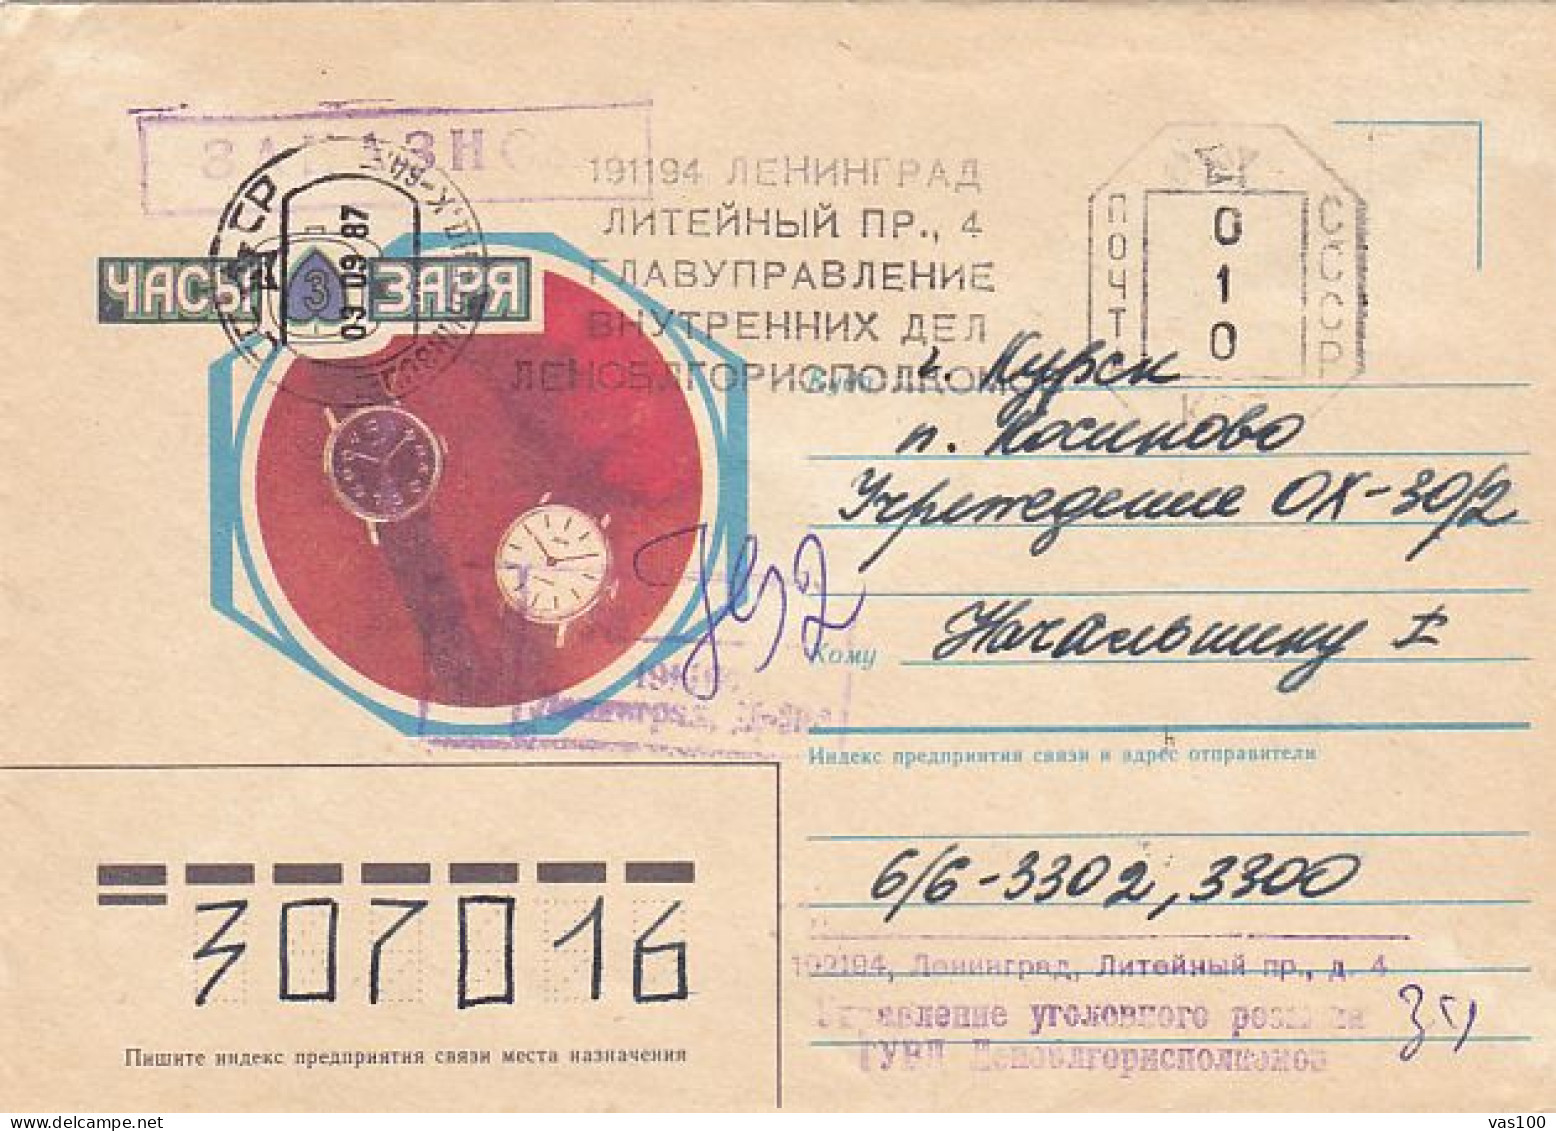 CLOCKS, WATCHES, SPECIAL COVER, 1987, RUSSIA - Horlogerie